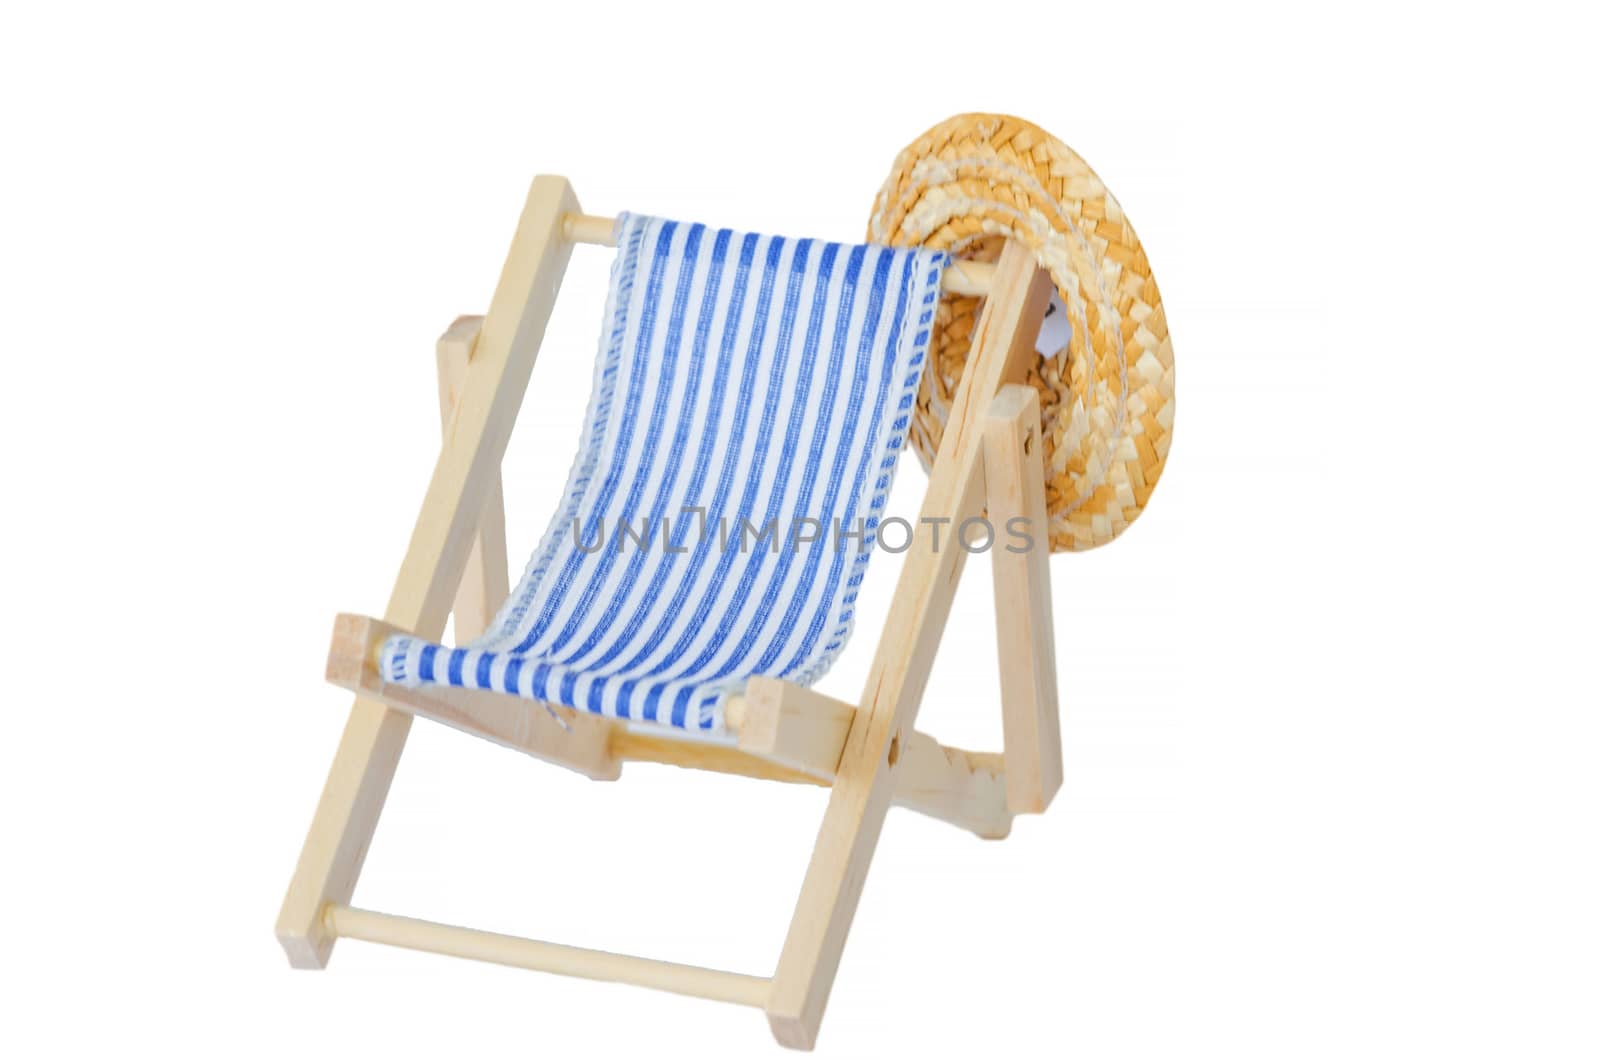 Wooden deck chair with sun hat on a white background.